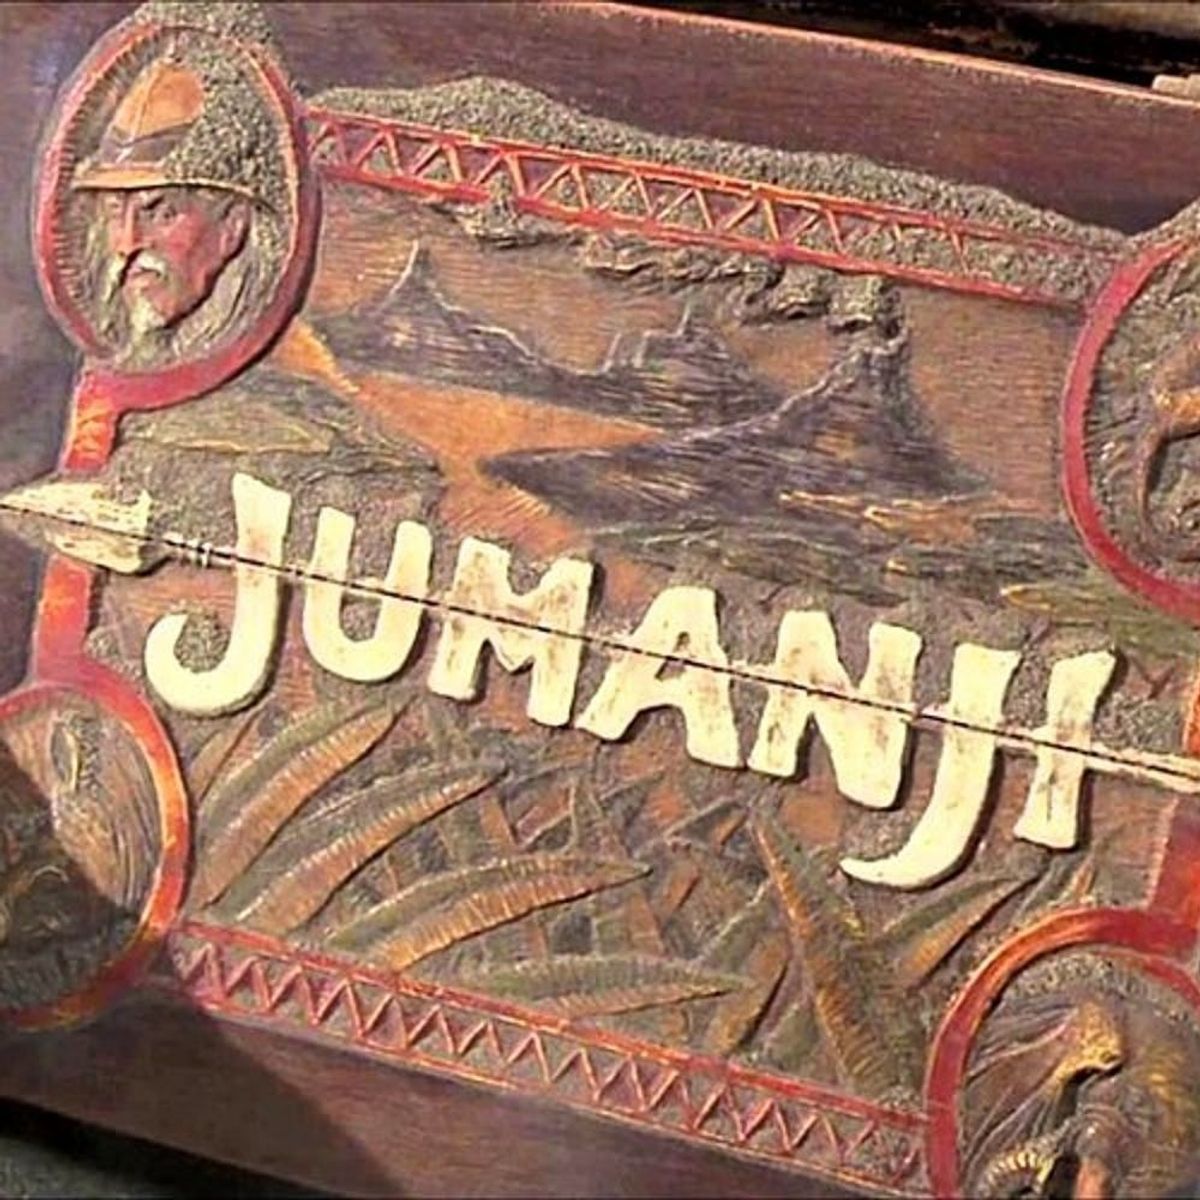 Our First Look at the Jumanji Reboot Shows the Stars Getting Wild